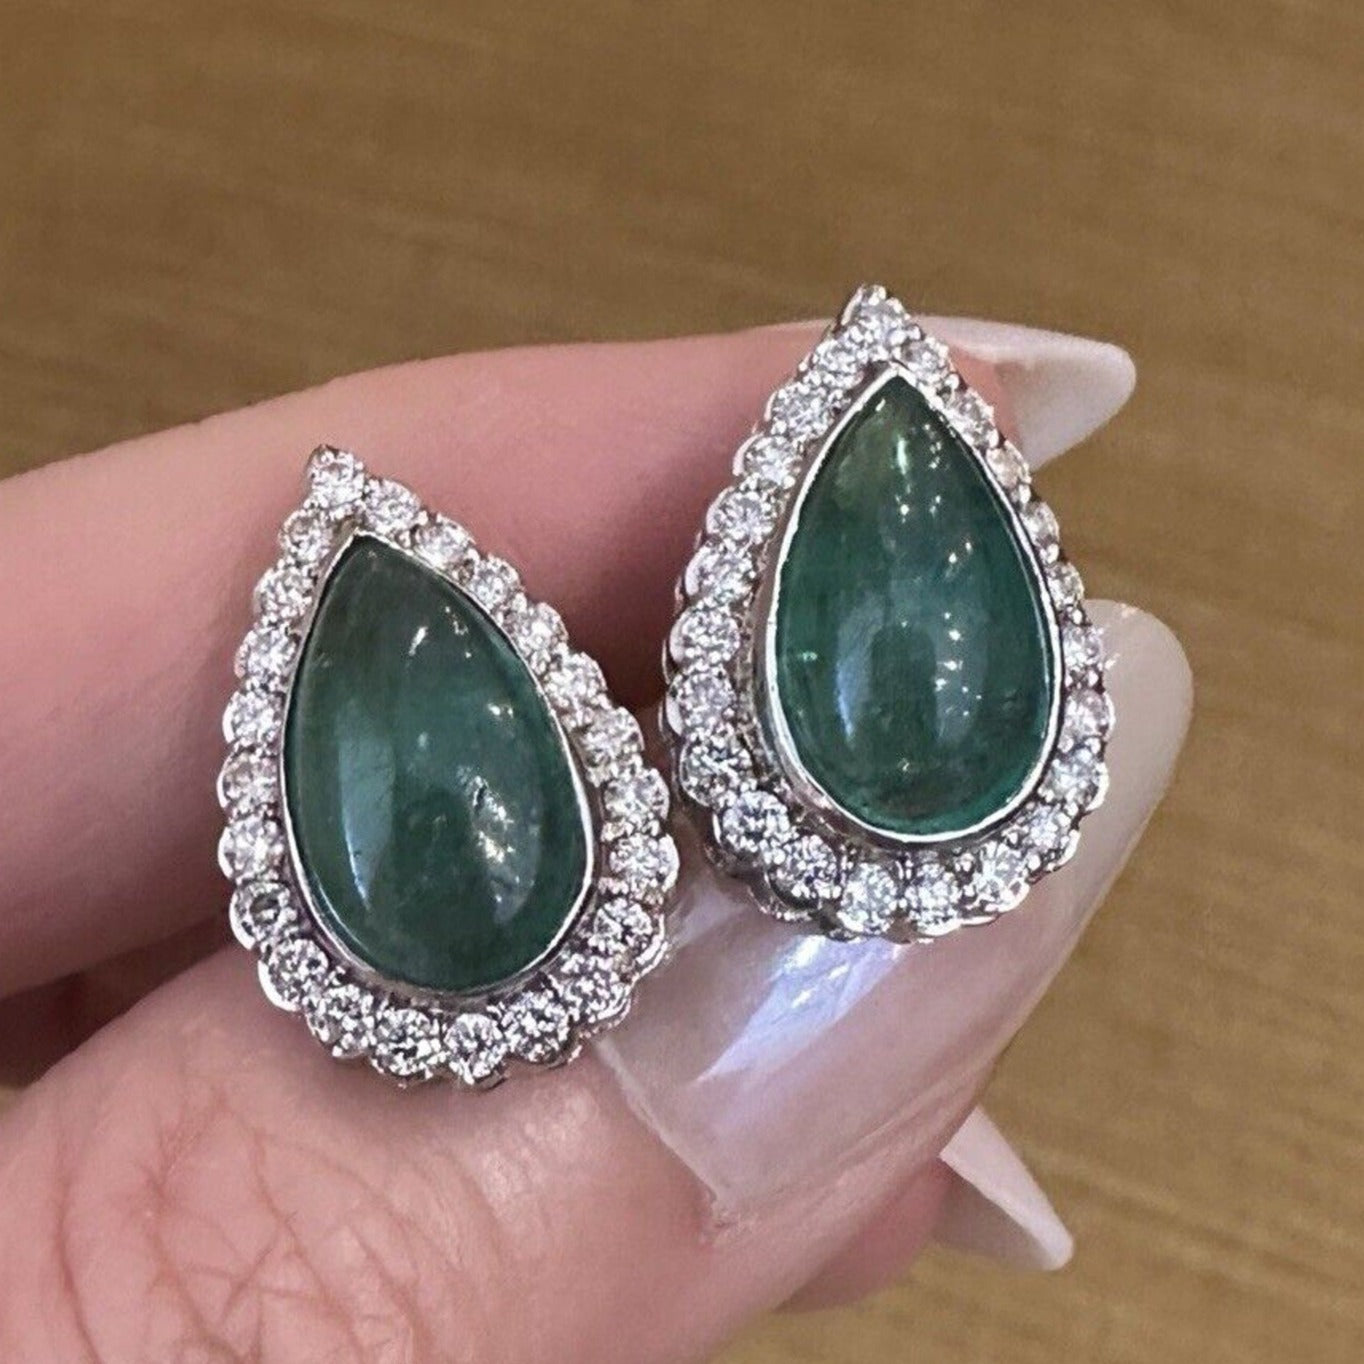 Emerald Cabochon Earrings with Diamonds in 18k White Gold